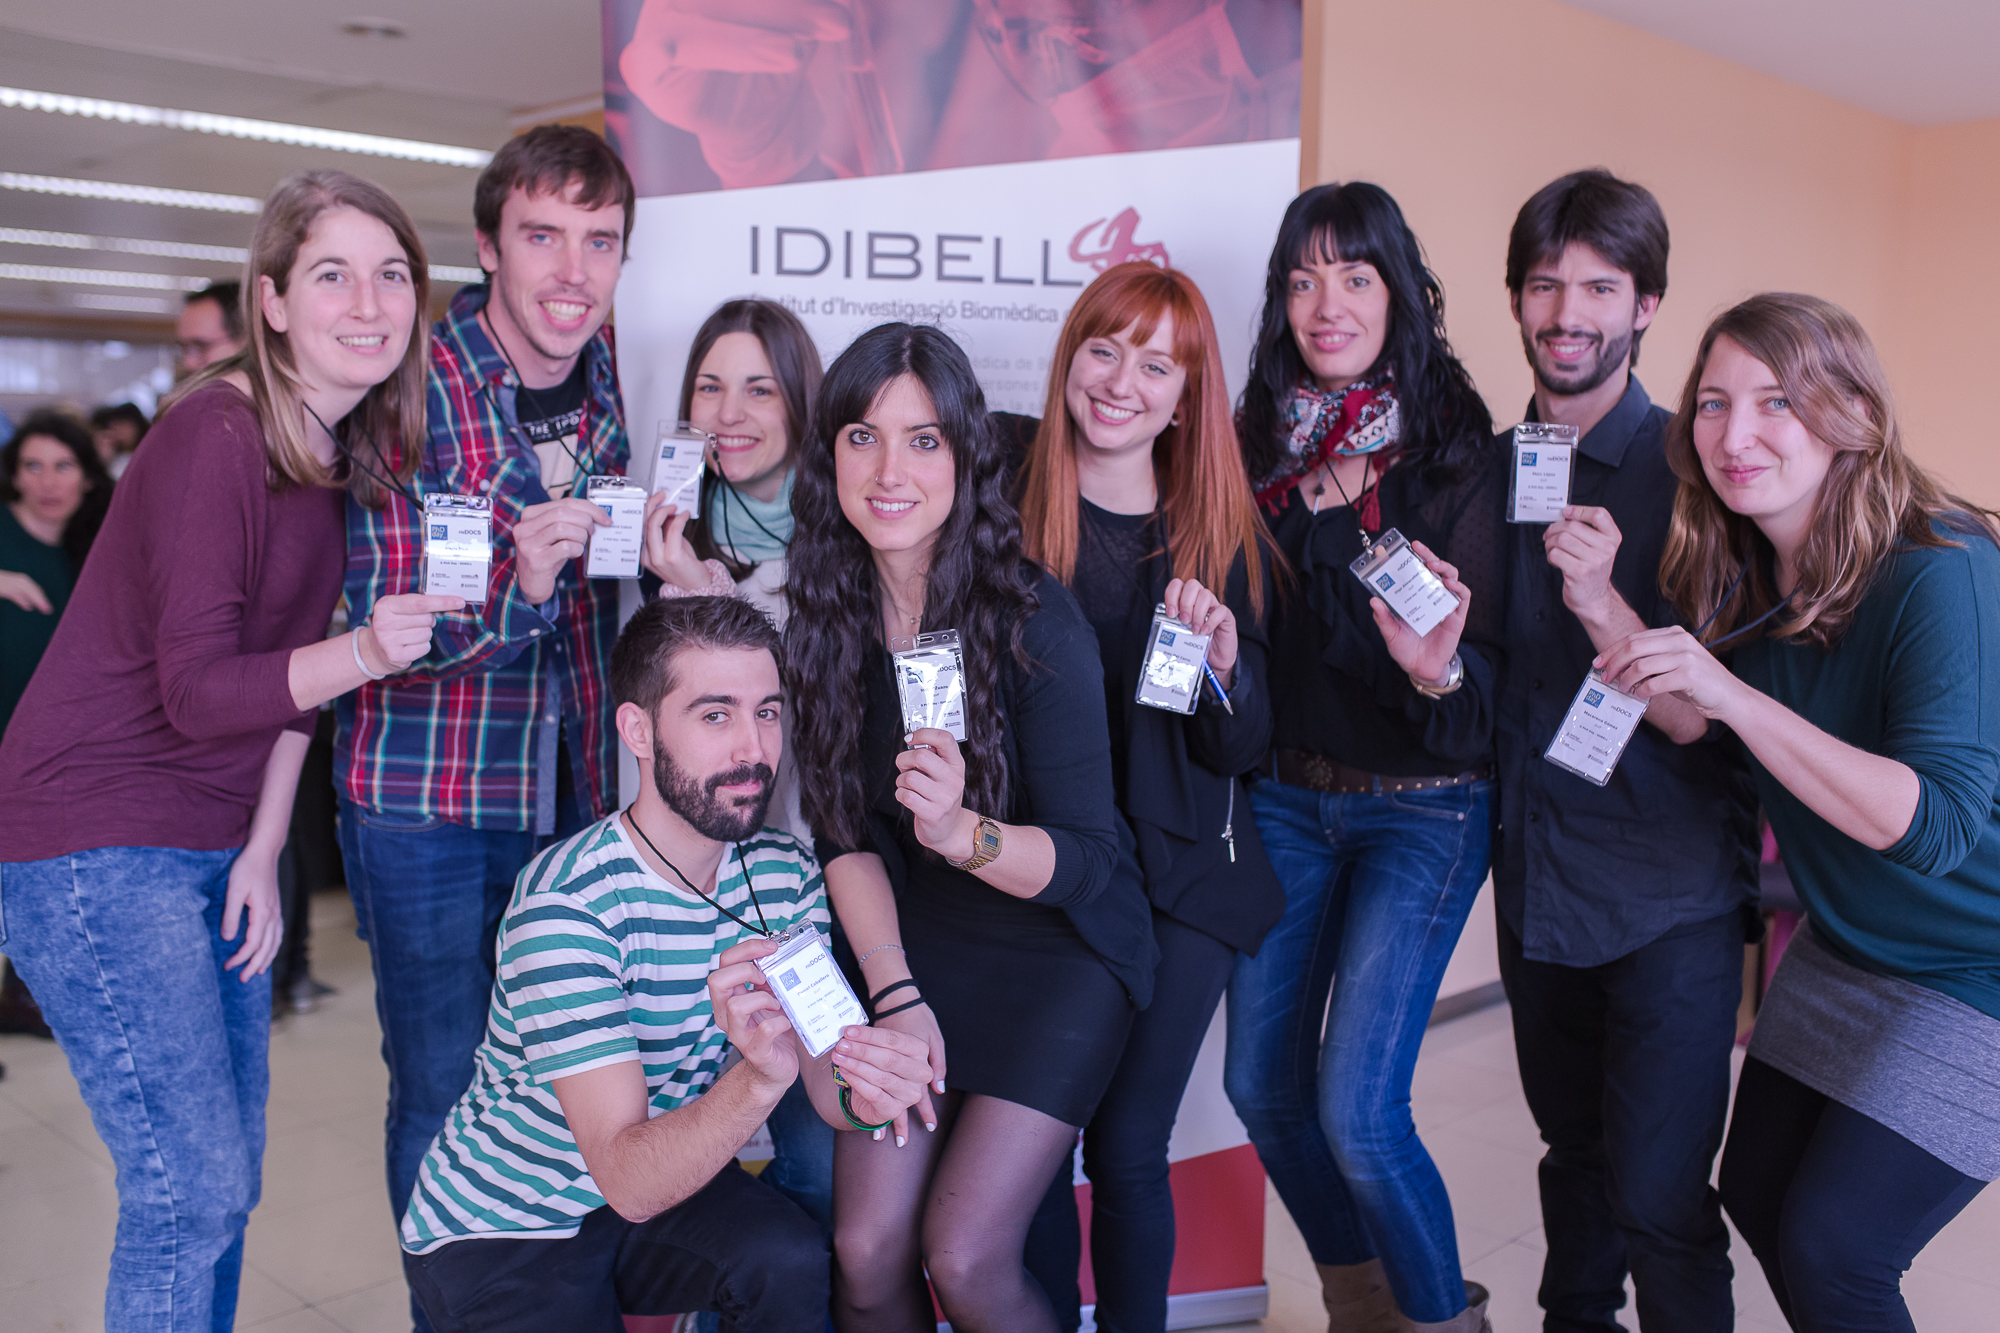 IDIBELL PhD Day & the potential of young researchers